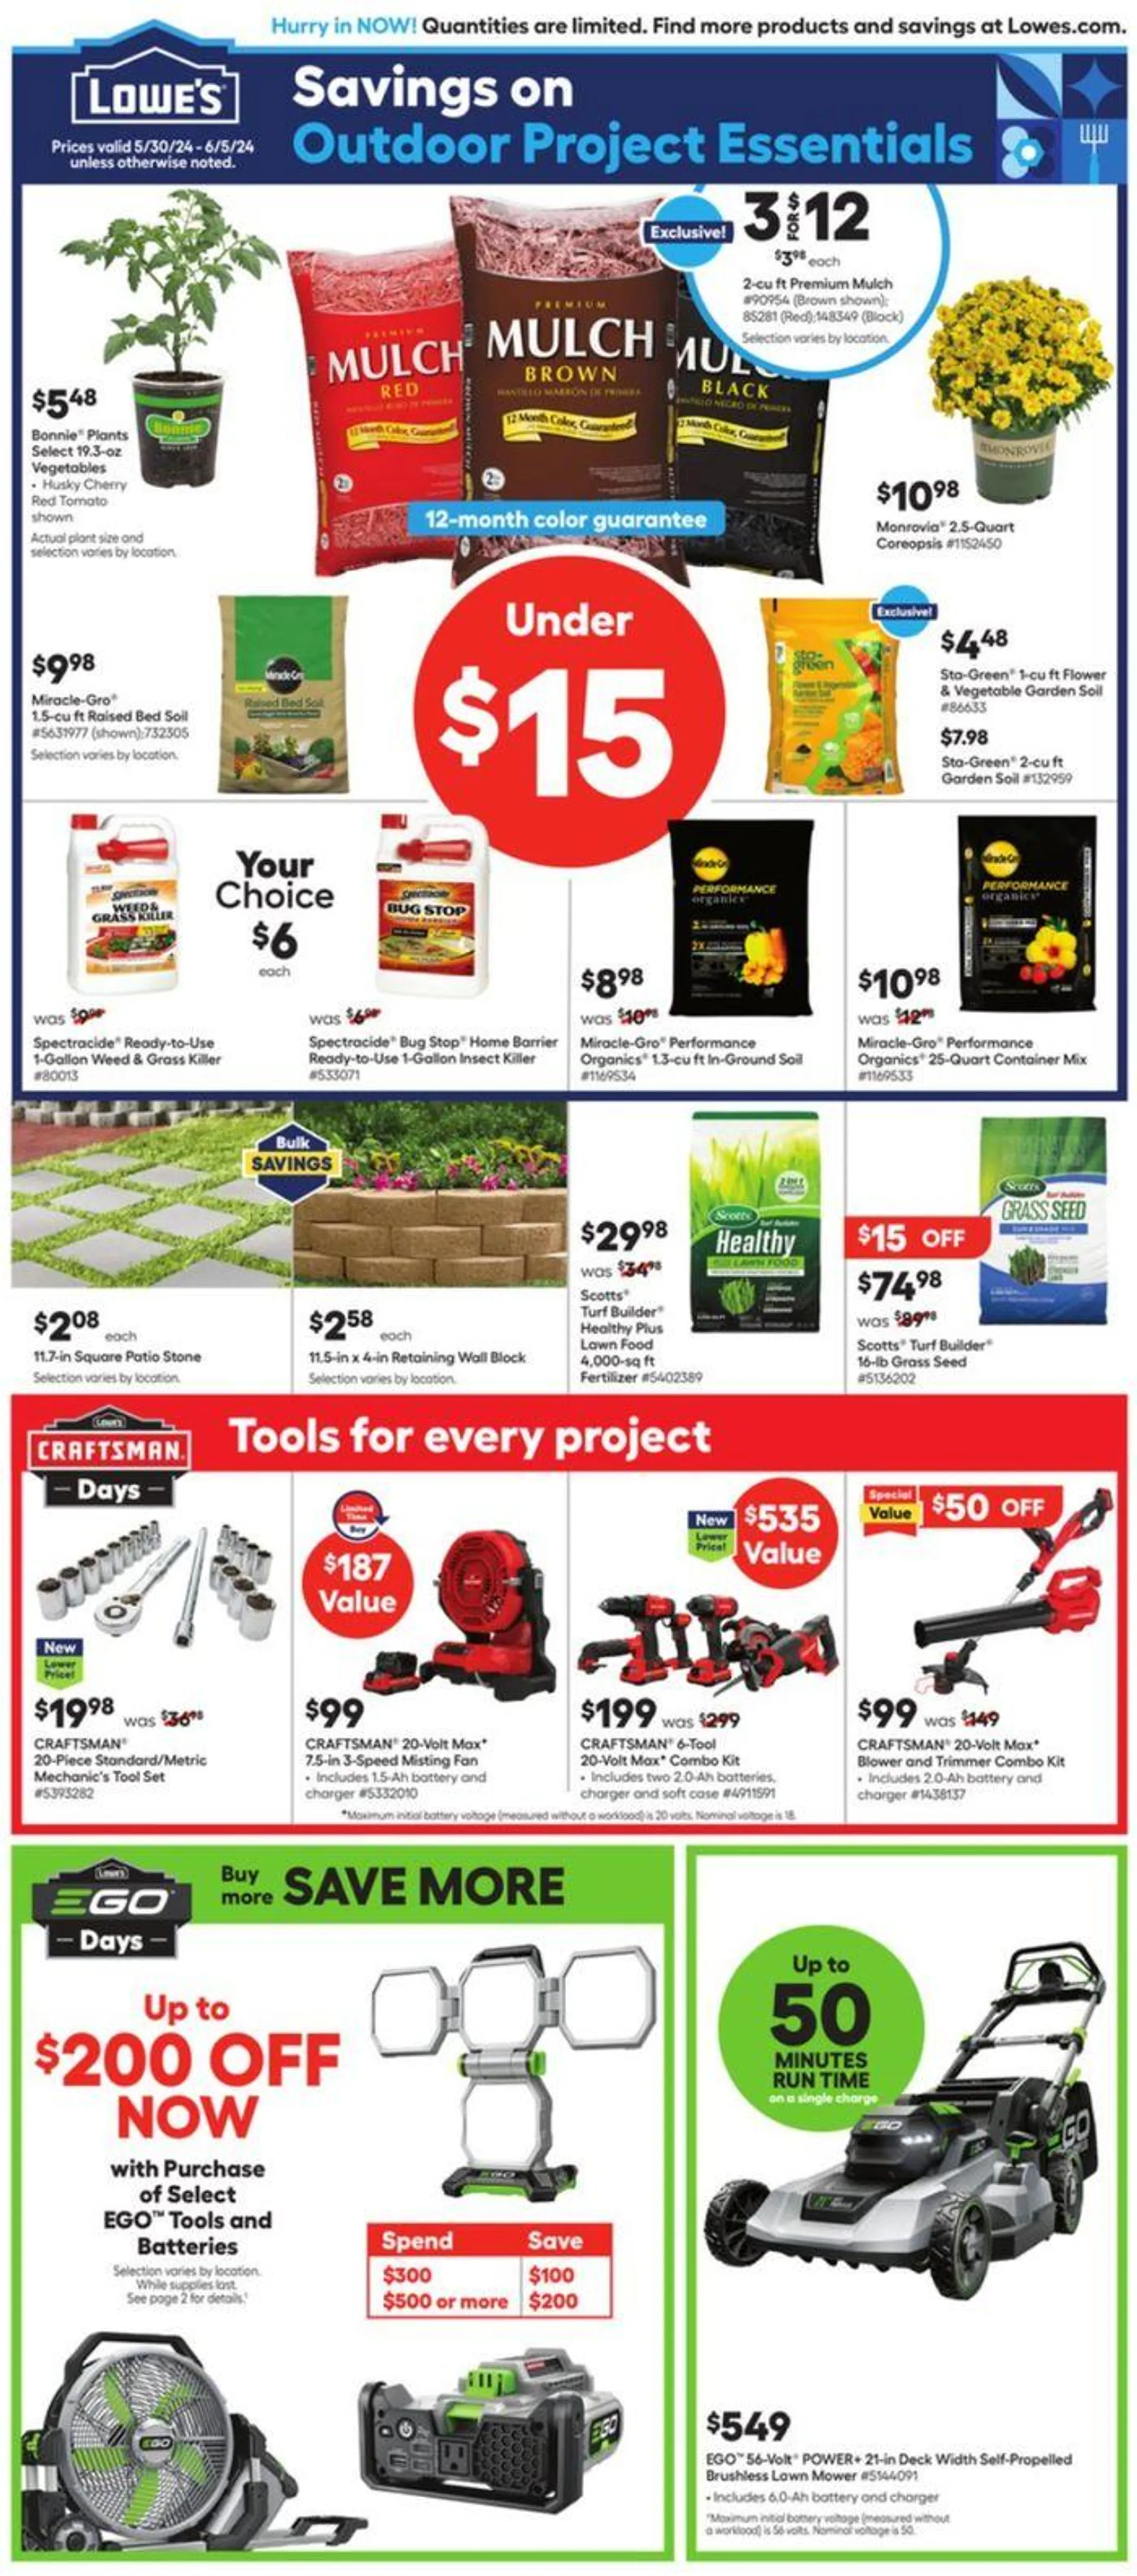 Savings on Outdoor Project Essentials - 1